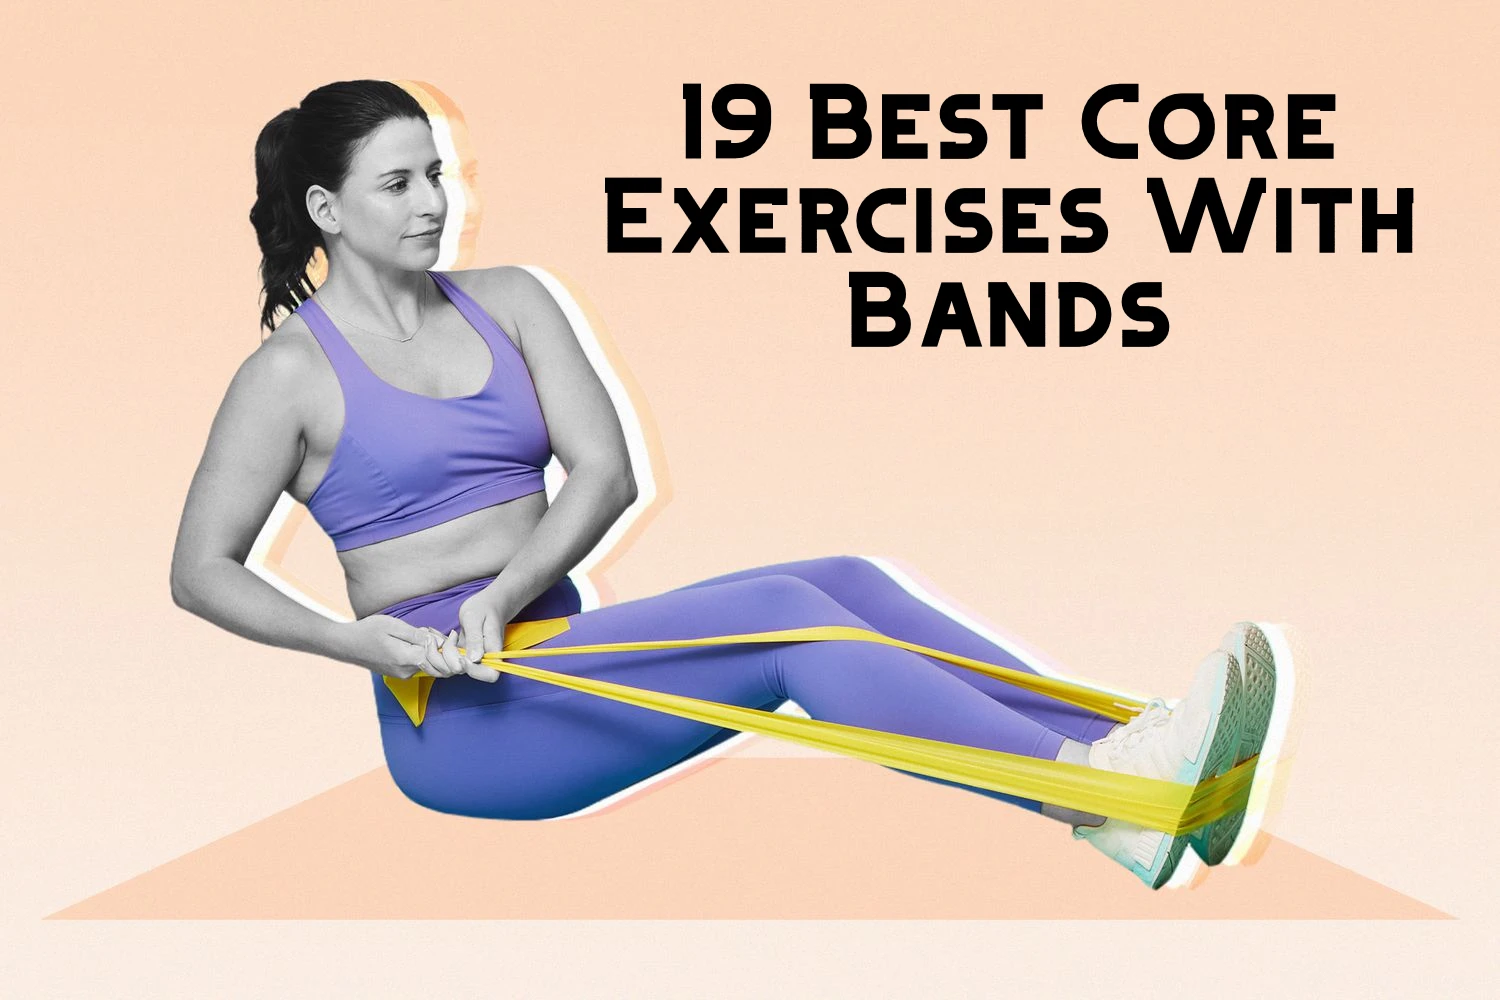 19 Best Resistance Band Exercises